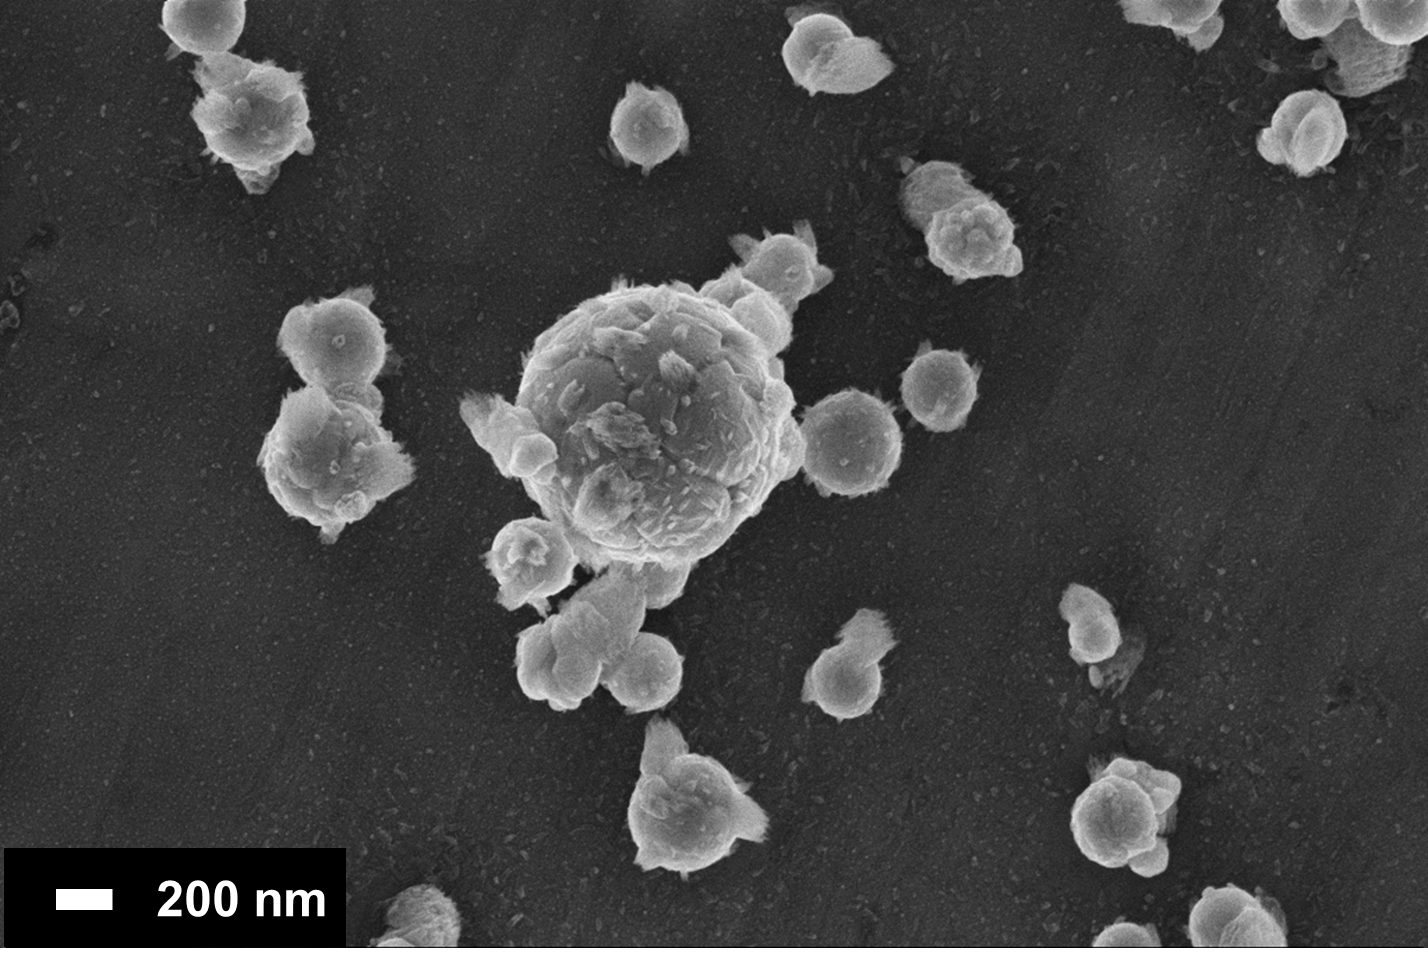 Scanning electron micrographs (SEM) of silver nanoparticles generated using atmospheric pressure plasma technique